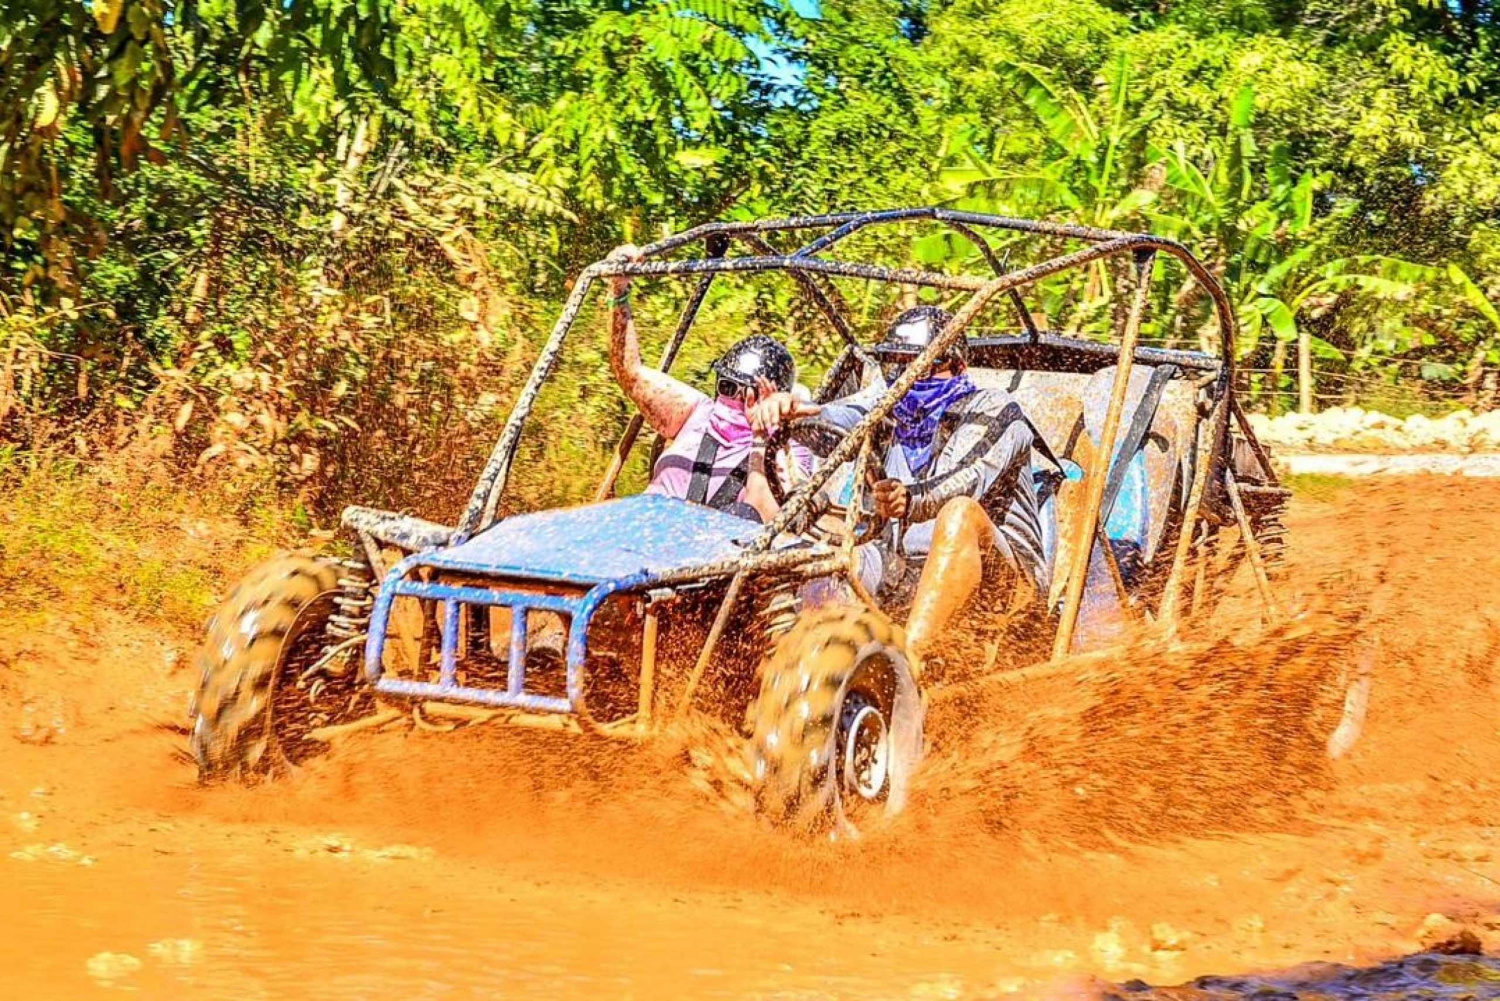 Punta Cana Highlights Tour Double Buggy Excursion